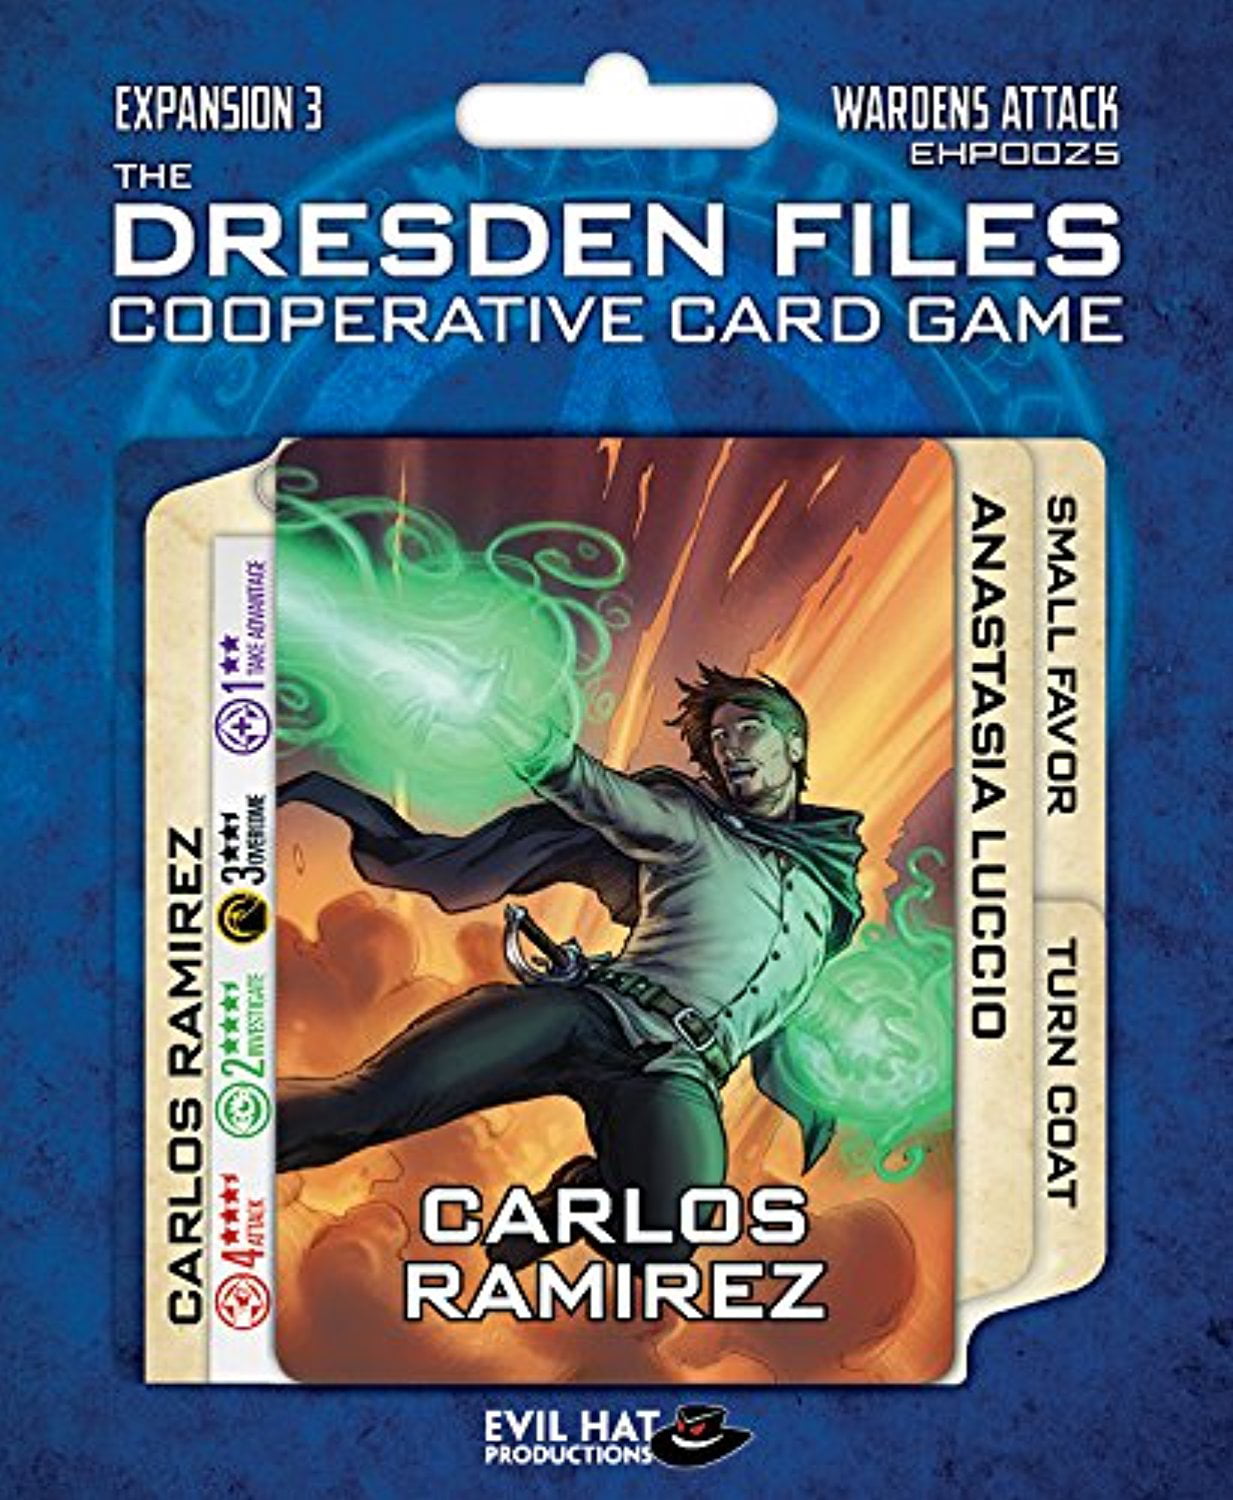 Ehp0025 Dresden Files Cooperative Card Game - Wardens Attack Expansion